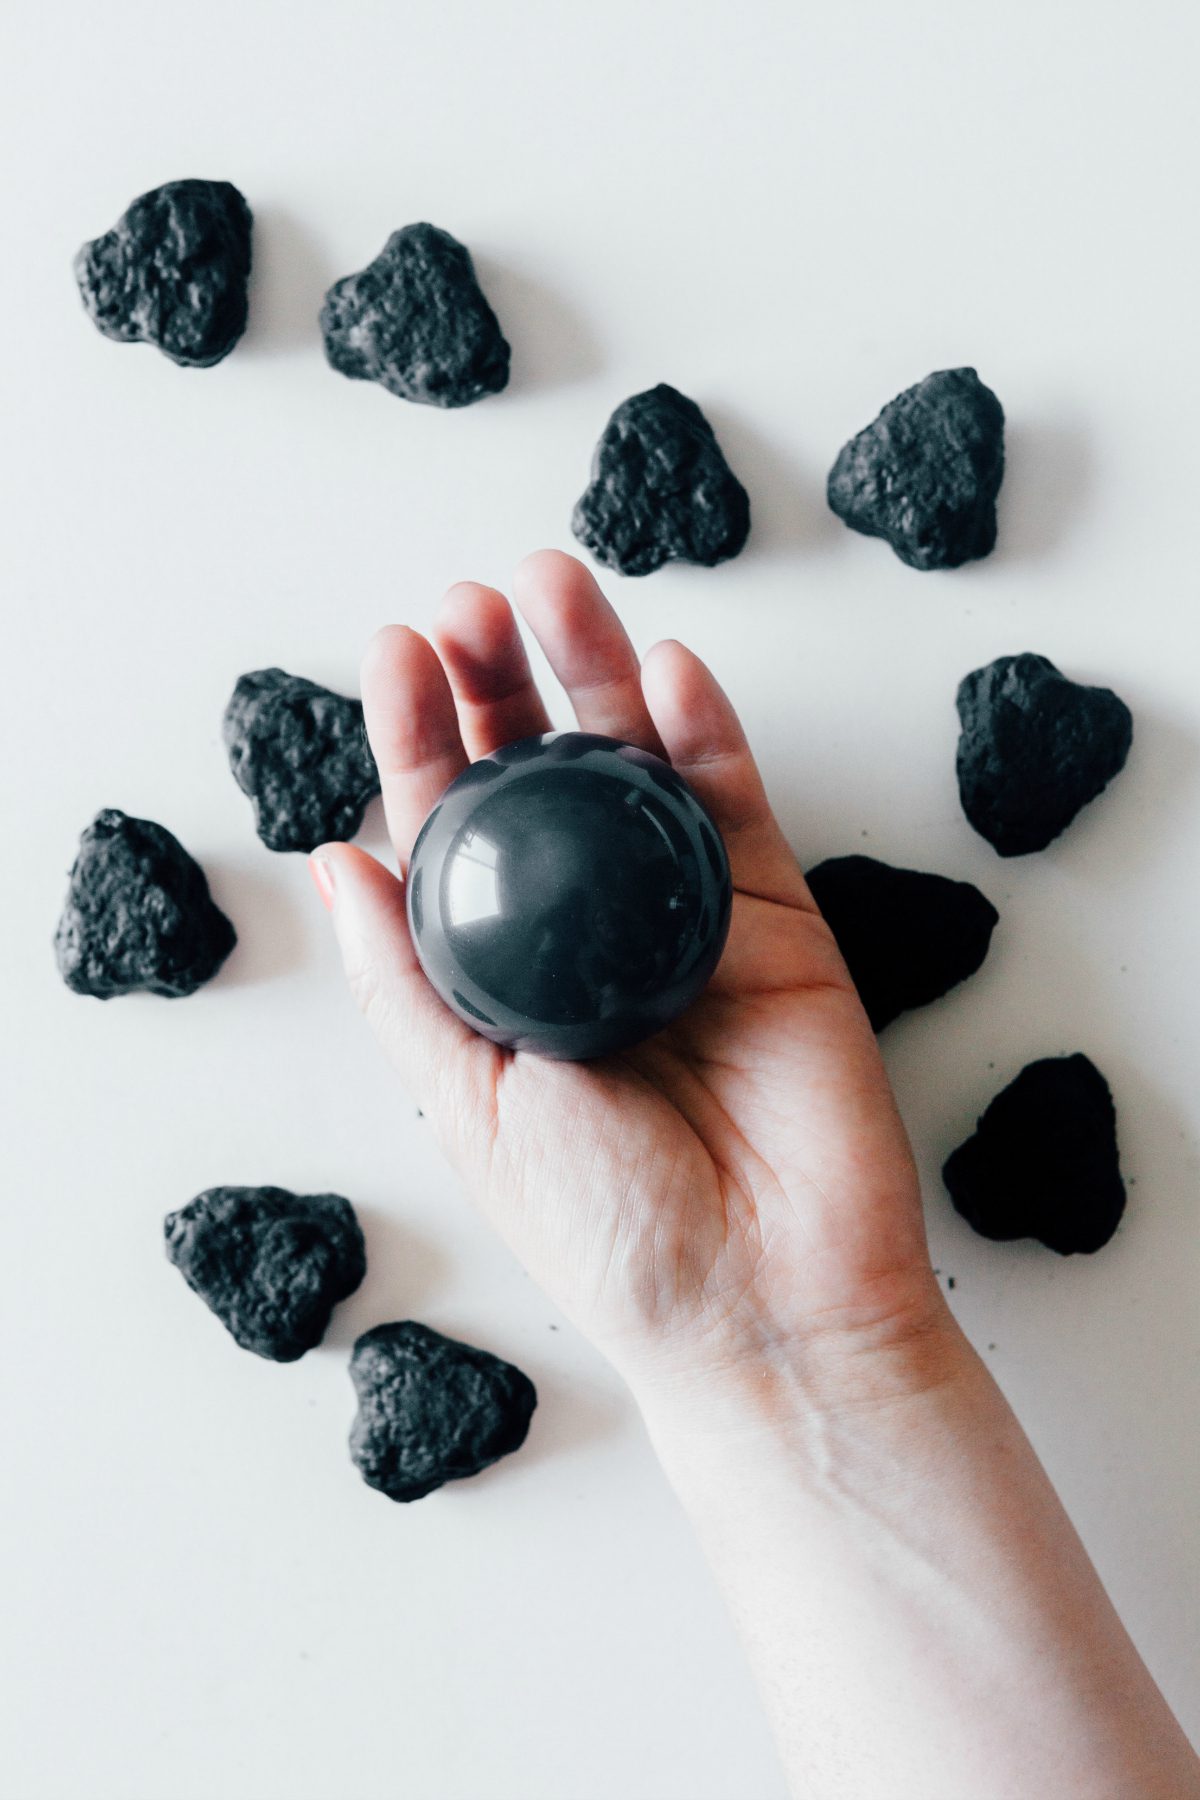 Charcoal-Infused Beauty Products from Boscia Charcoal Jelly Ball Cleanser 